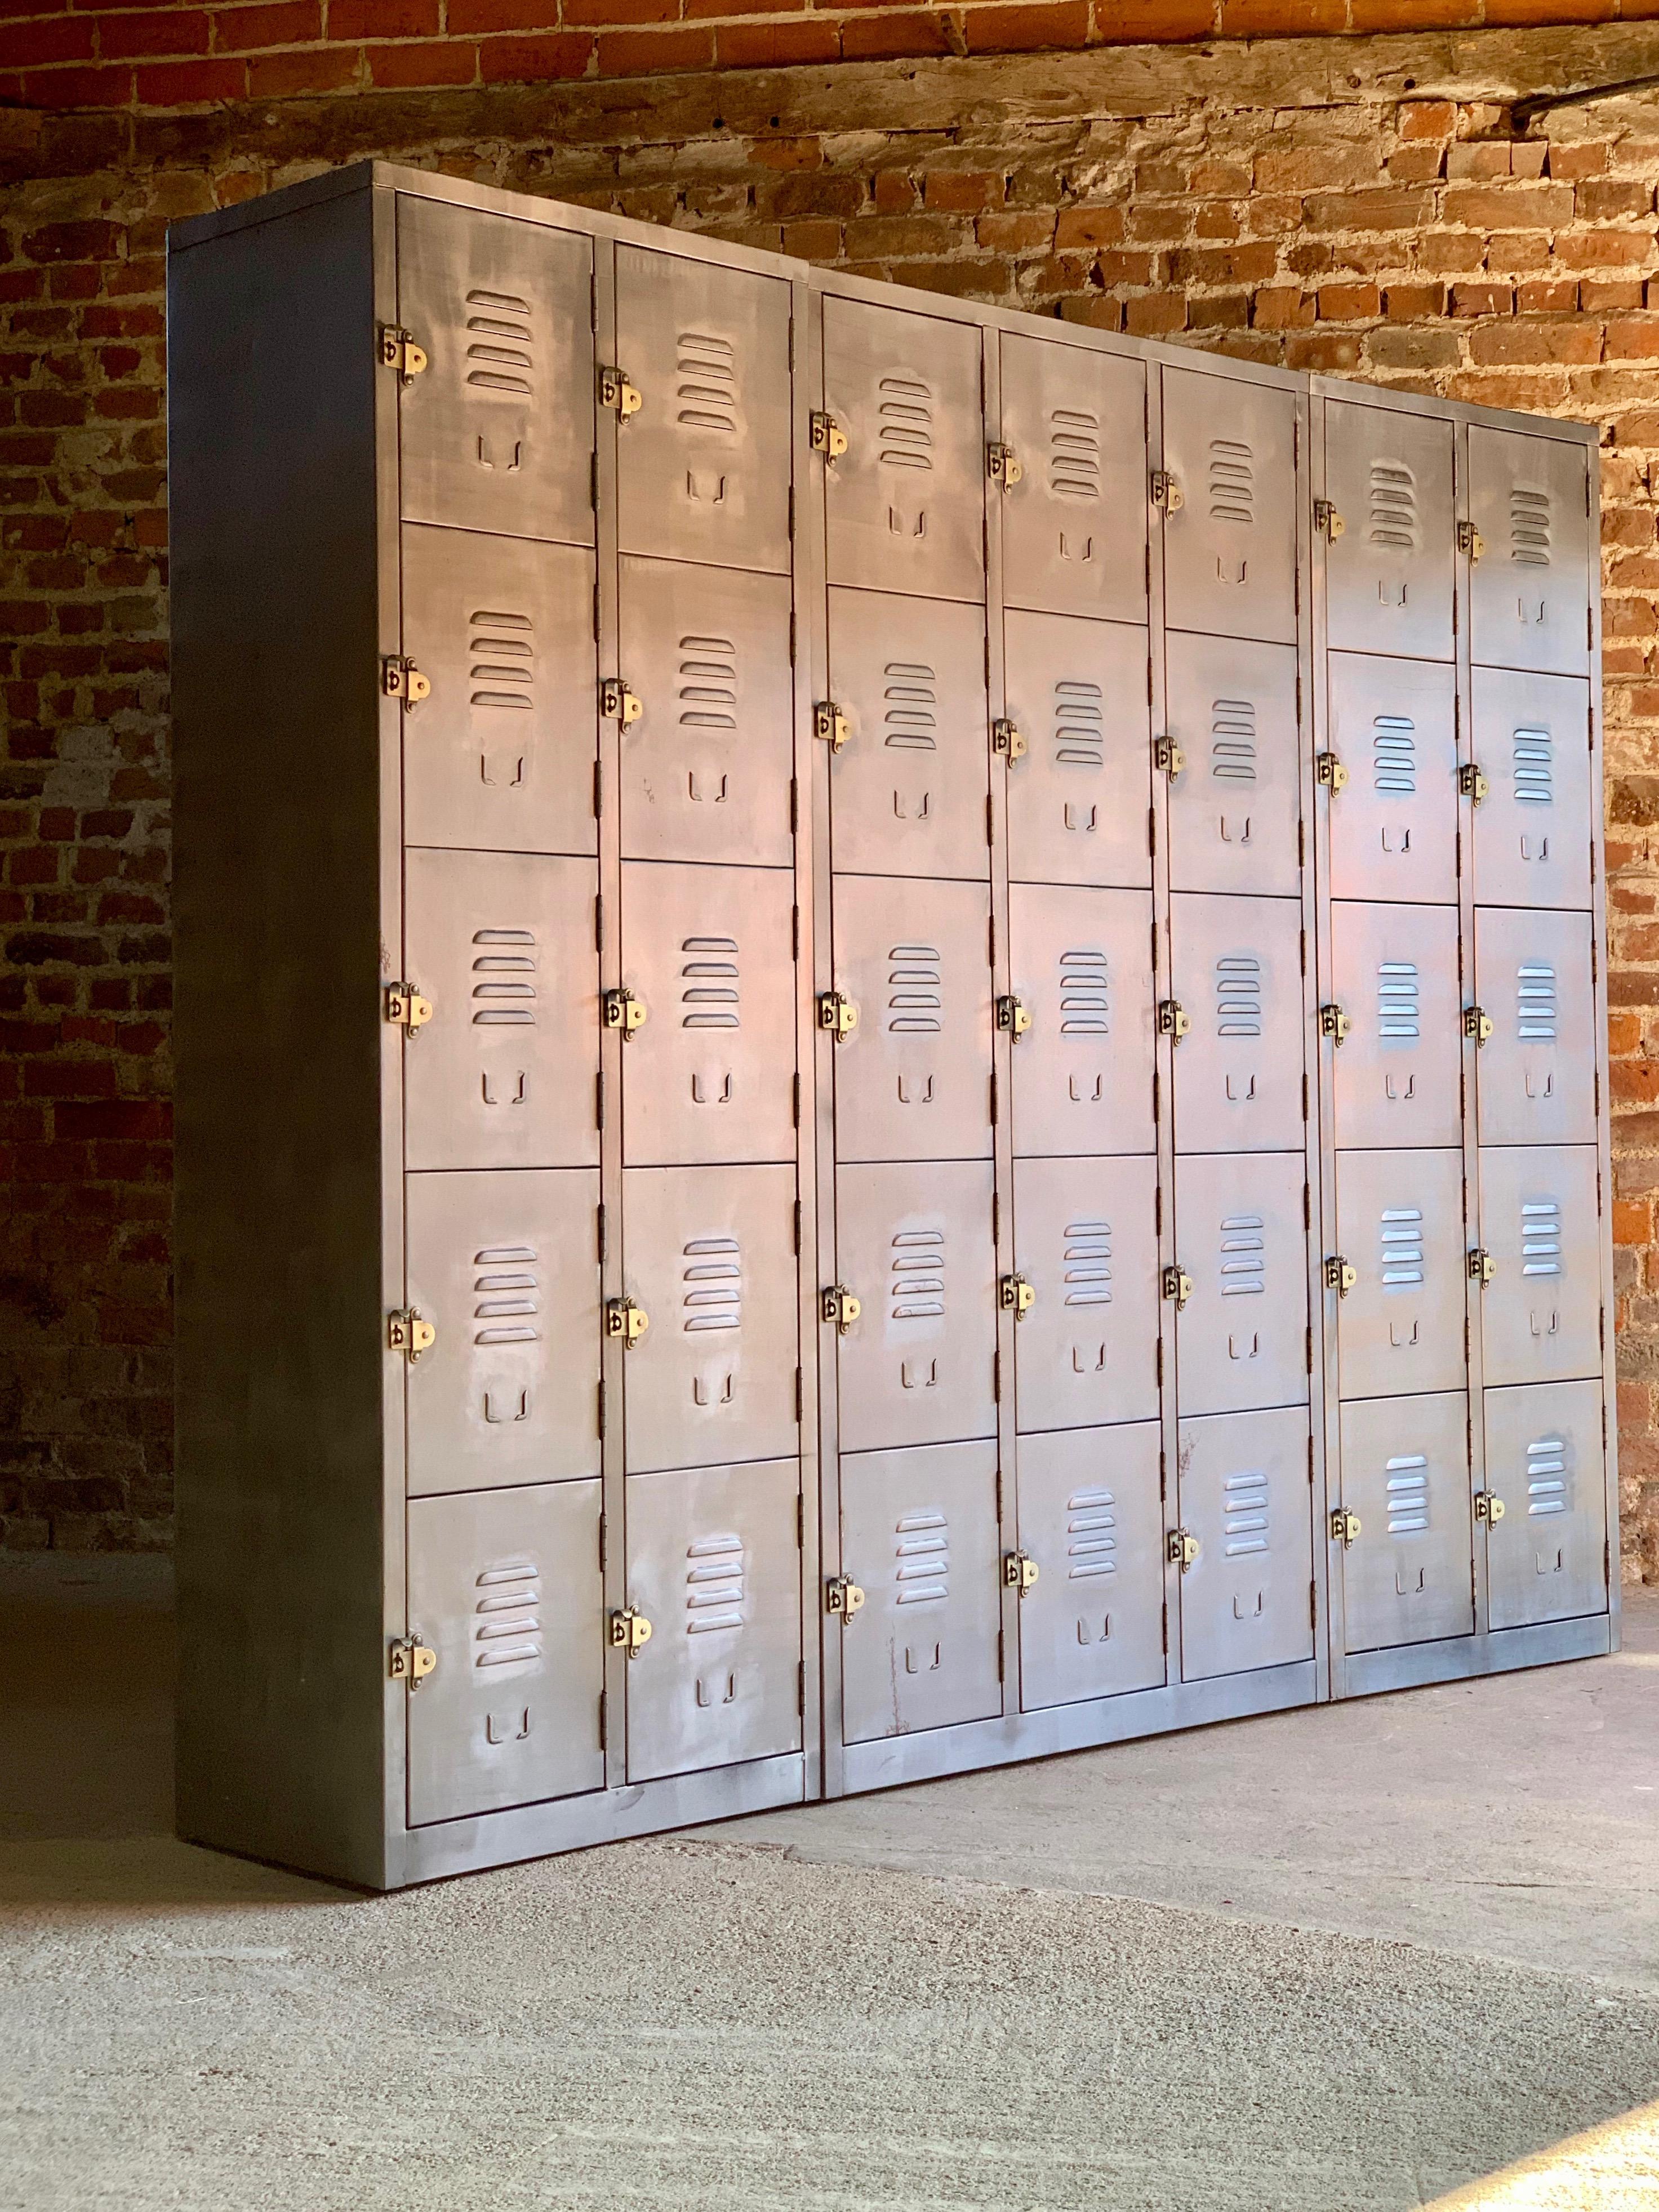 Magnificent Industrial steel lockers by Timothy Oulton loft style American School lockers

Fabulous set of Timothy Oulton industrial steel lockers comprising of one set of 15 lockers and two x sets of 10 lockers (total 35 cabinets)  Industrial